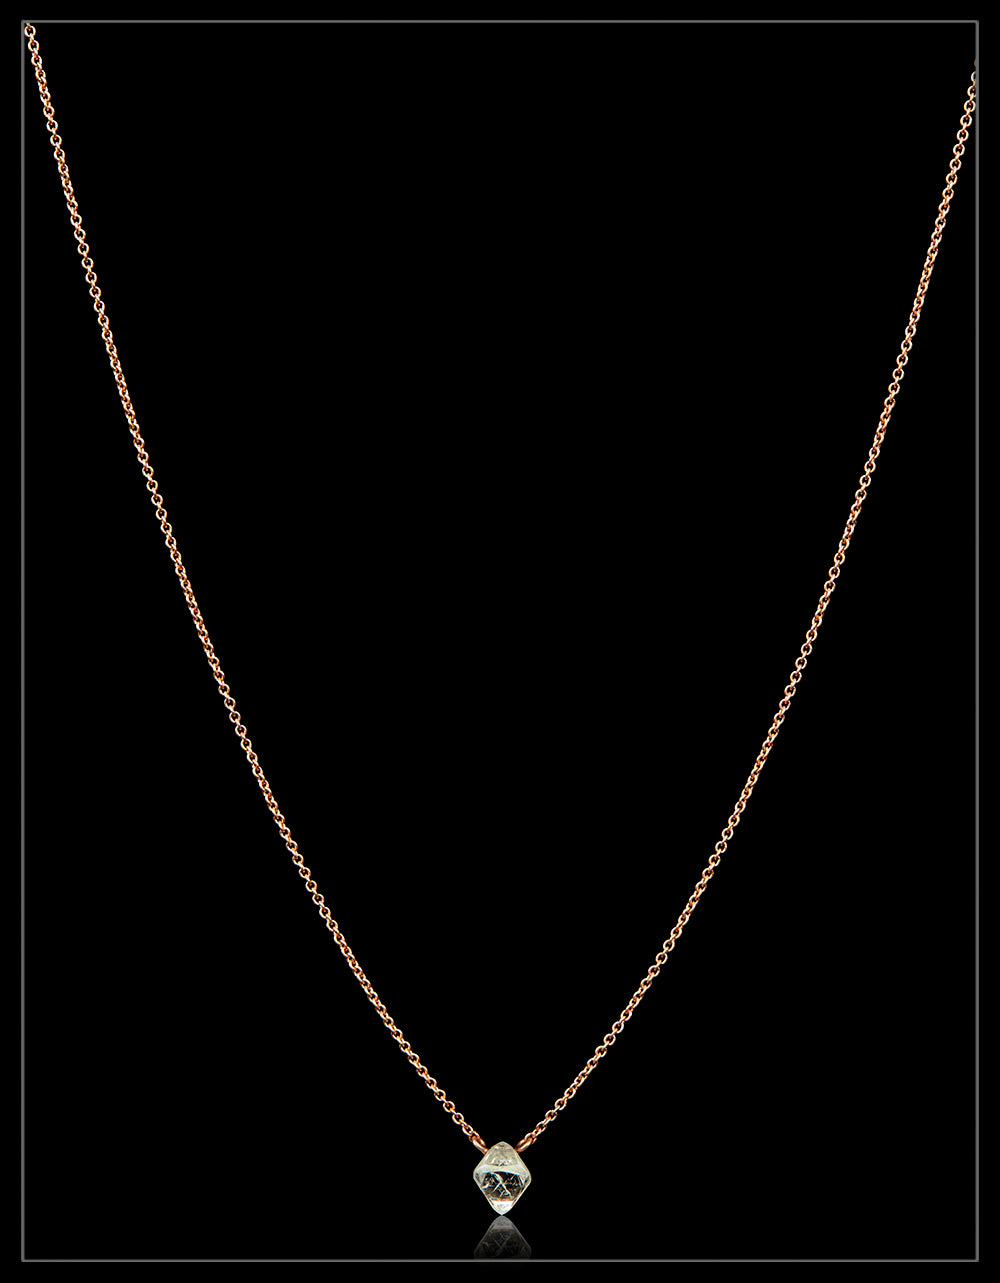 Natural Octahedron Diamond Necklace – 0.82 ct.